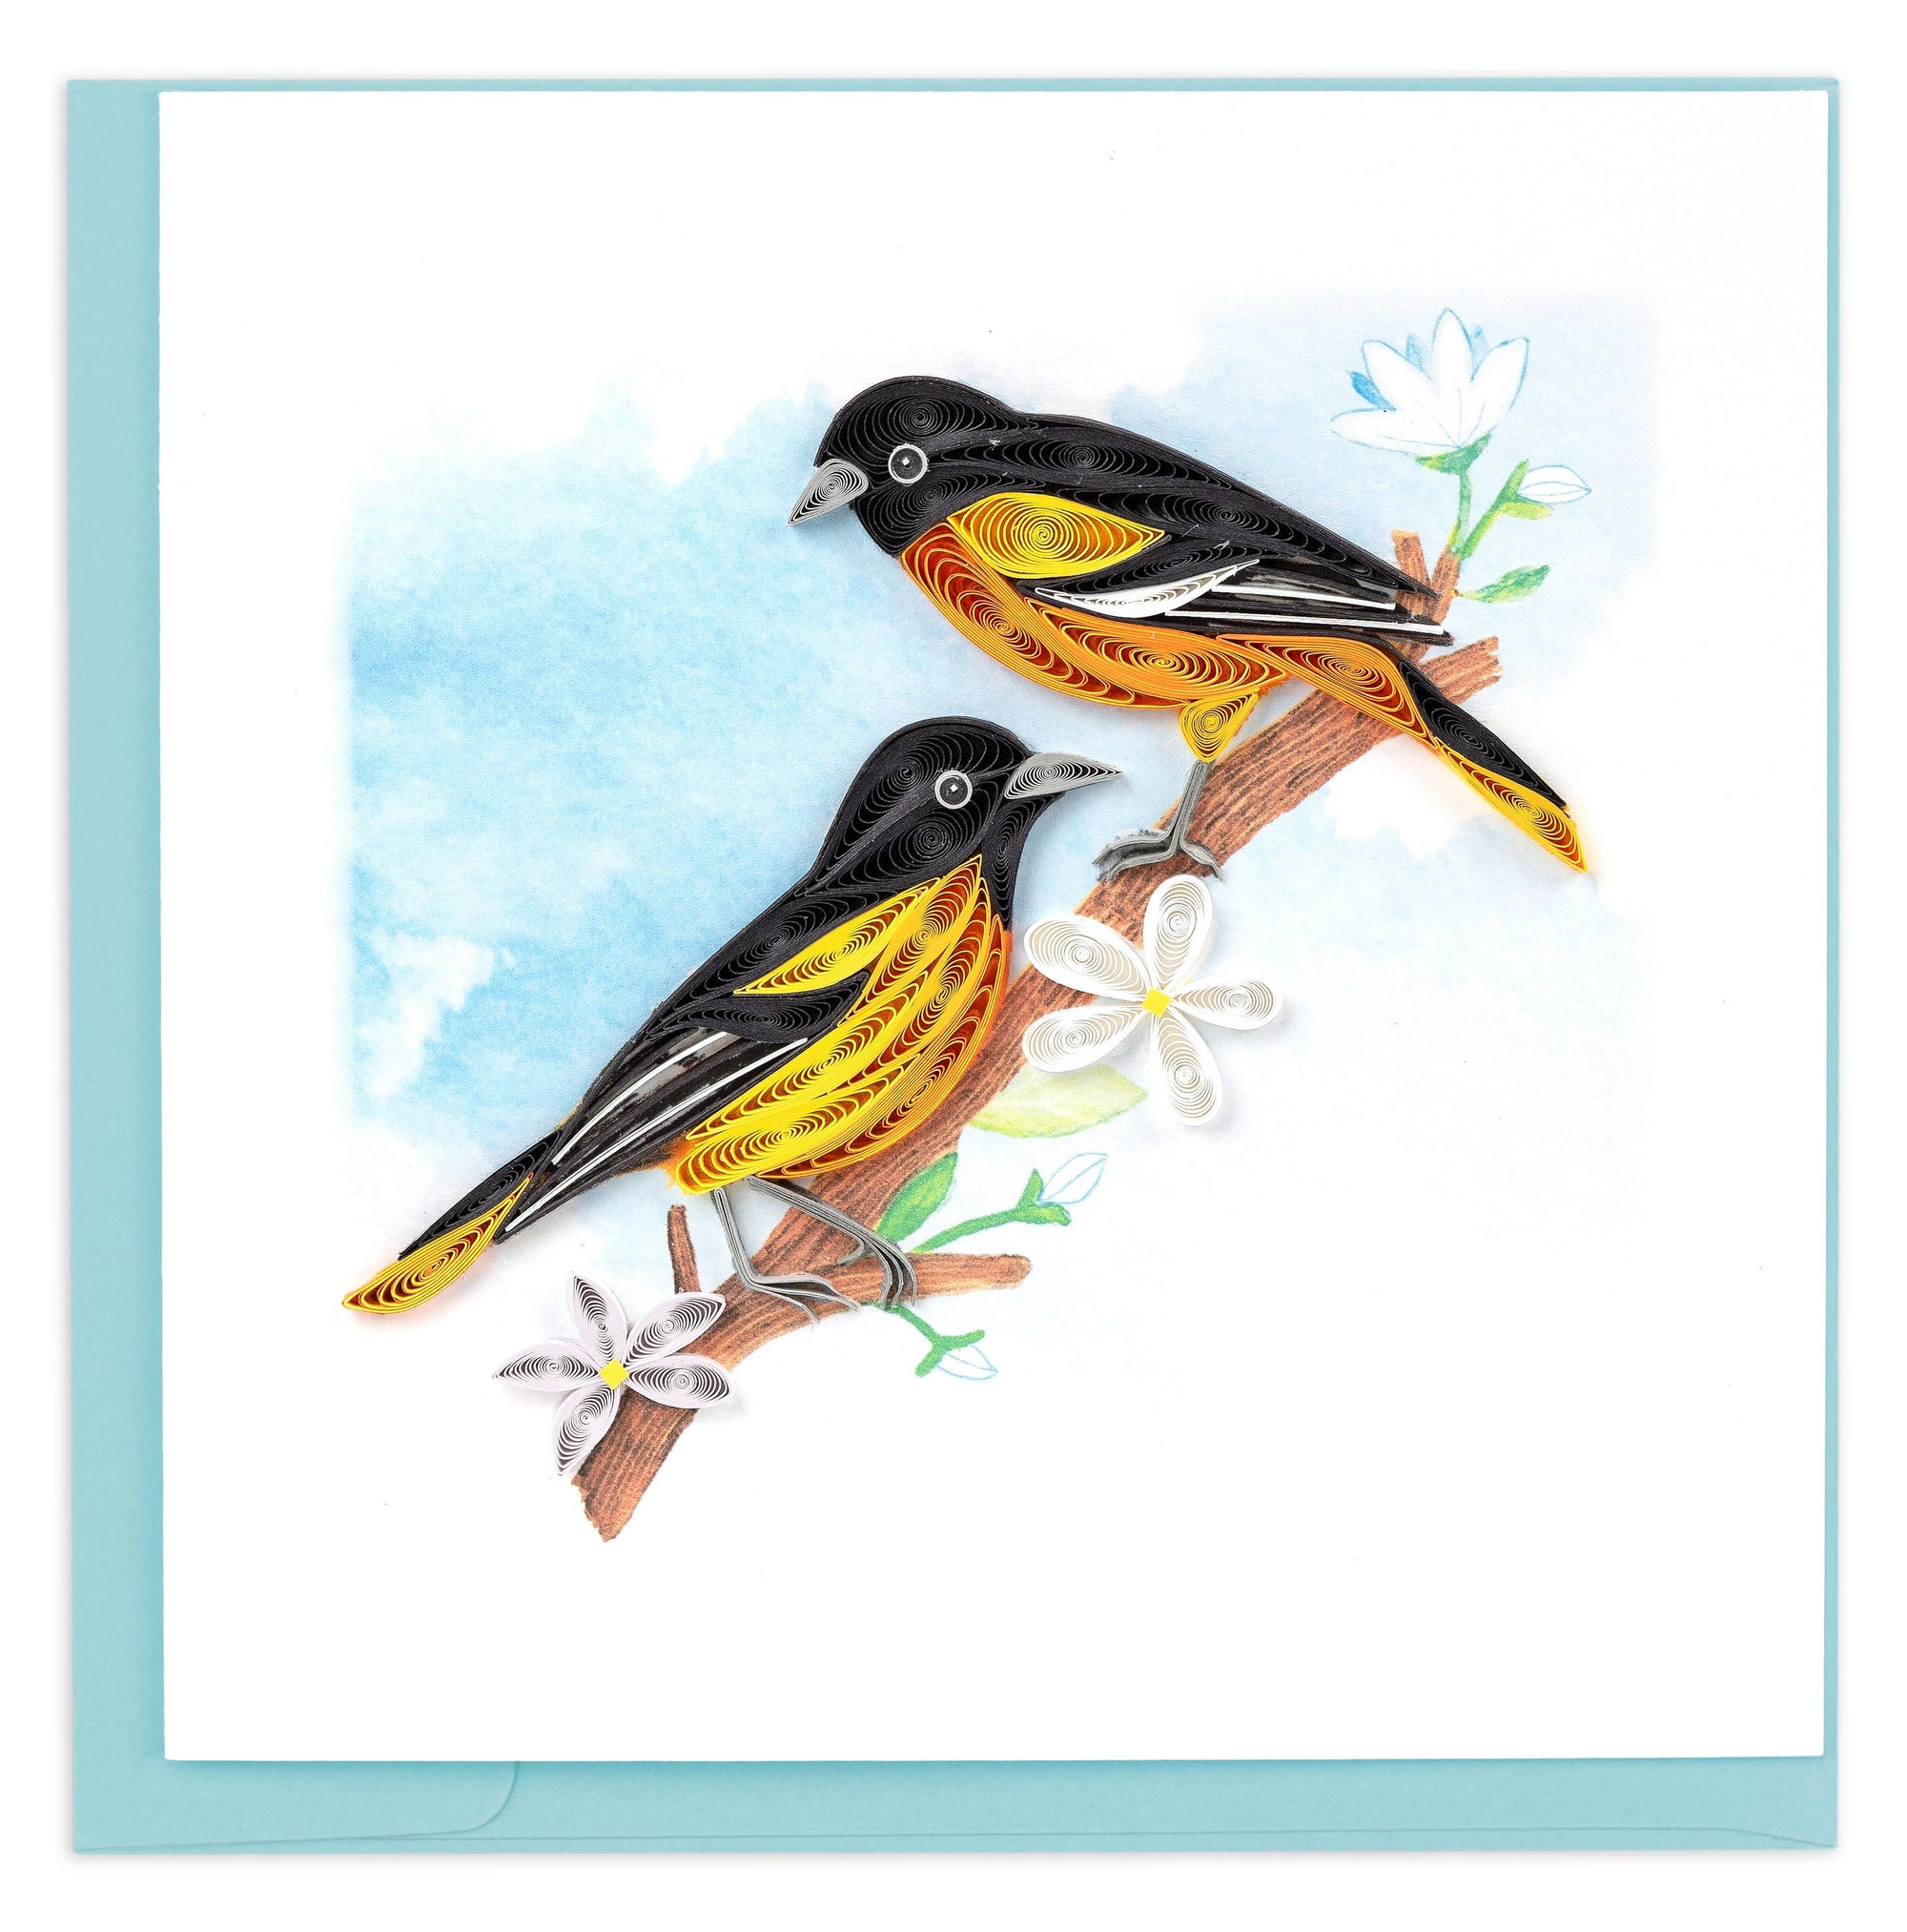 Quilled Baltimore Oriole Birds Greeting Card